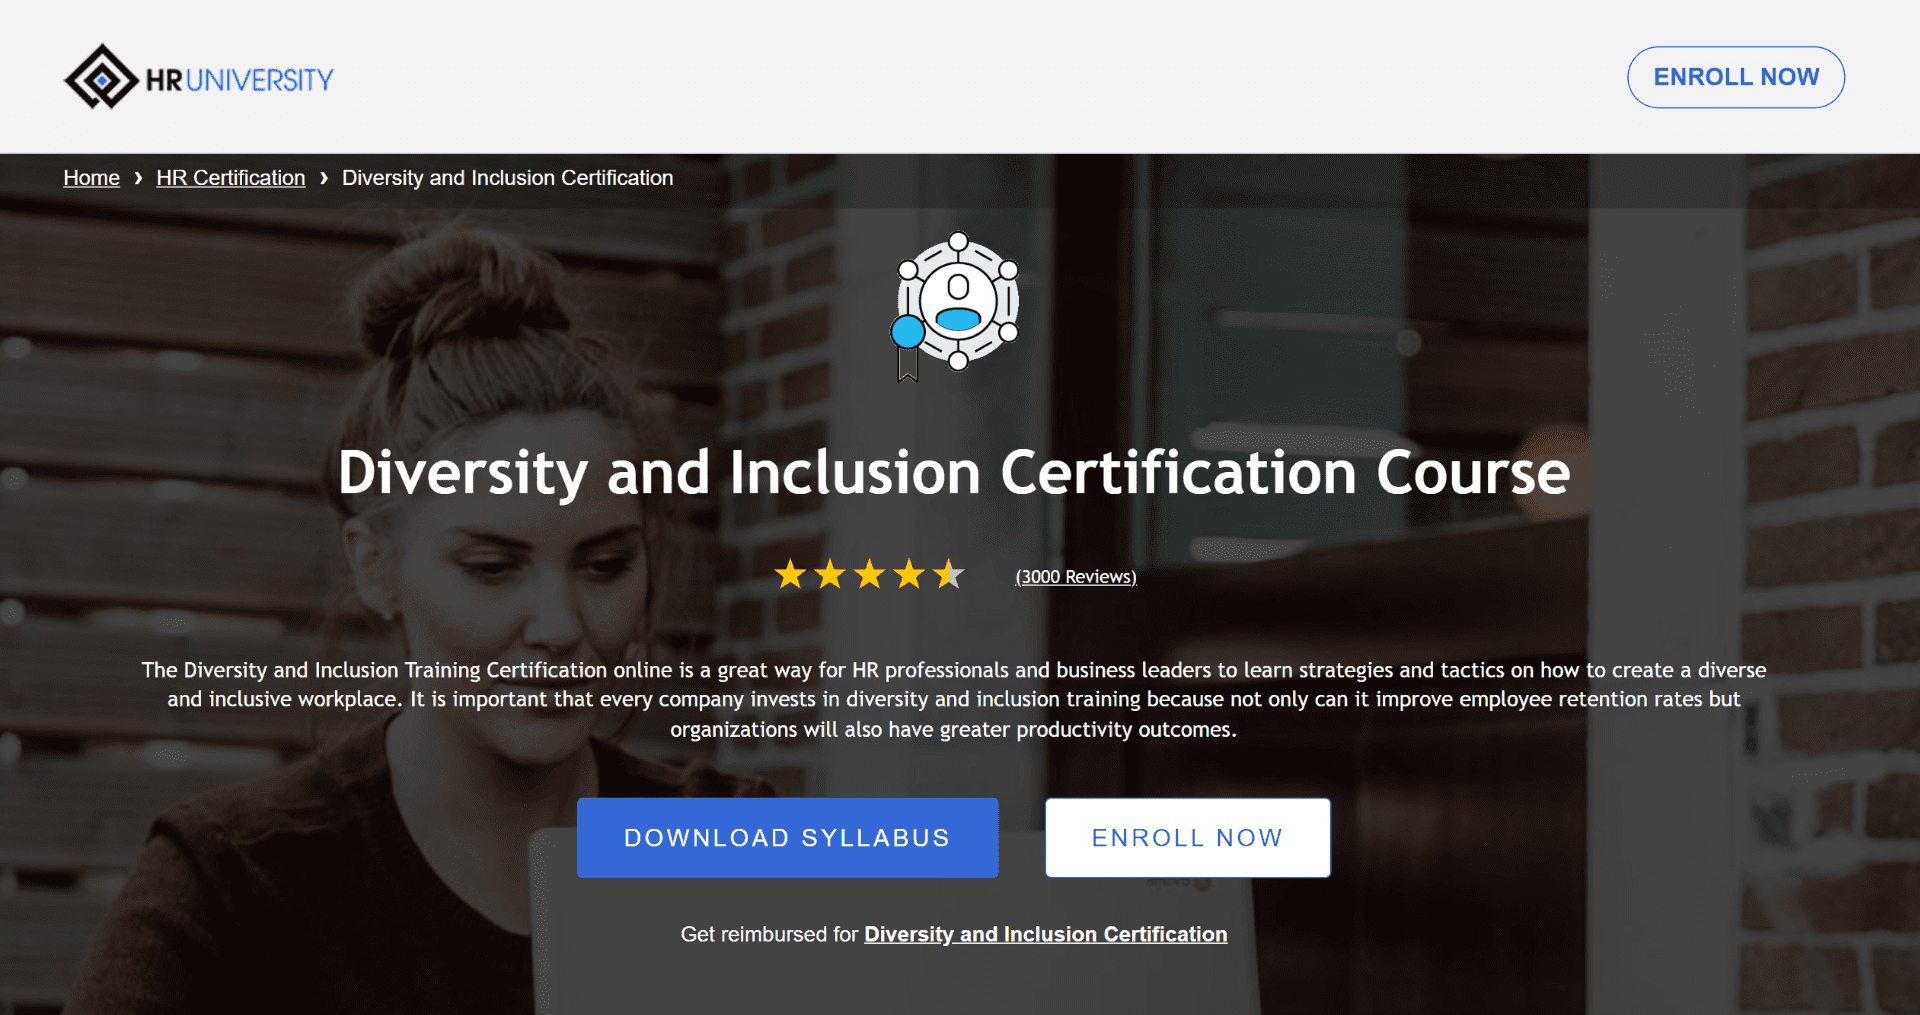 HR University Diversity and Inclusion Certification Course